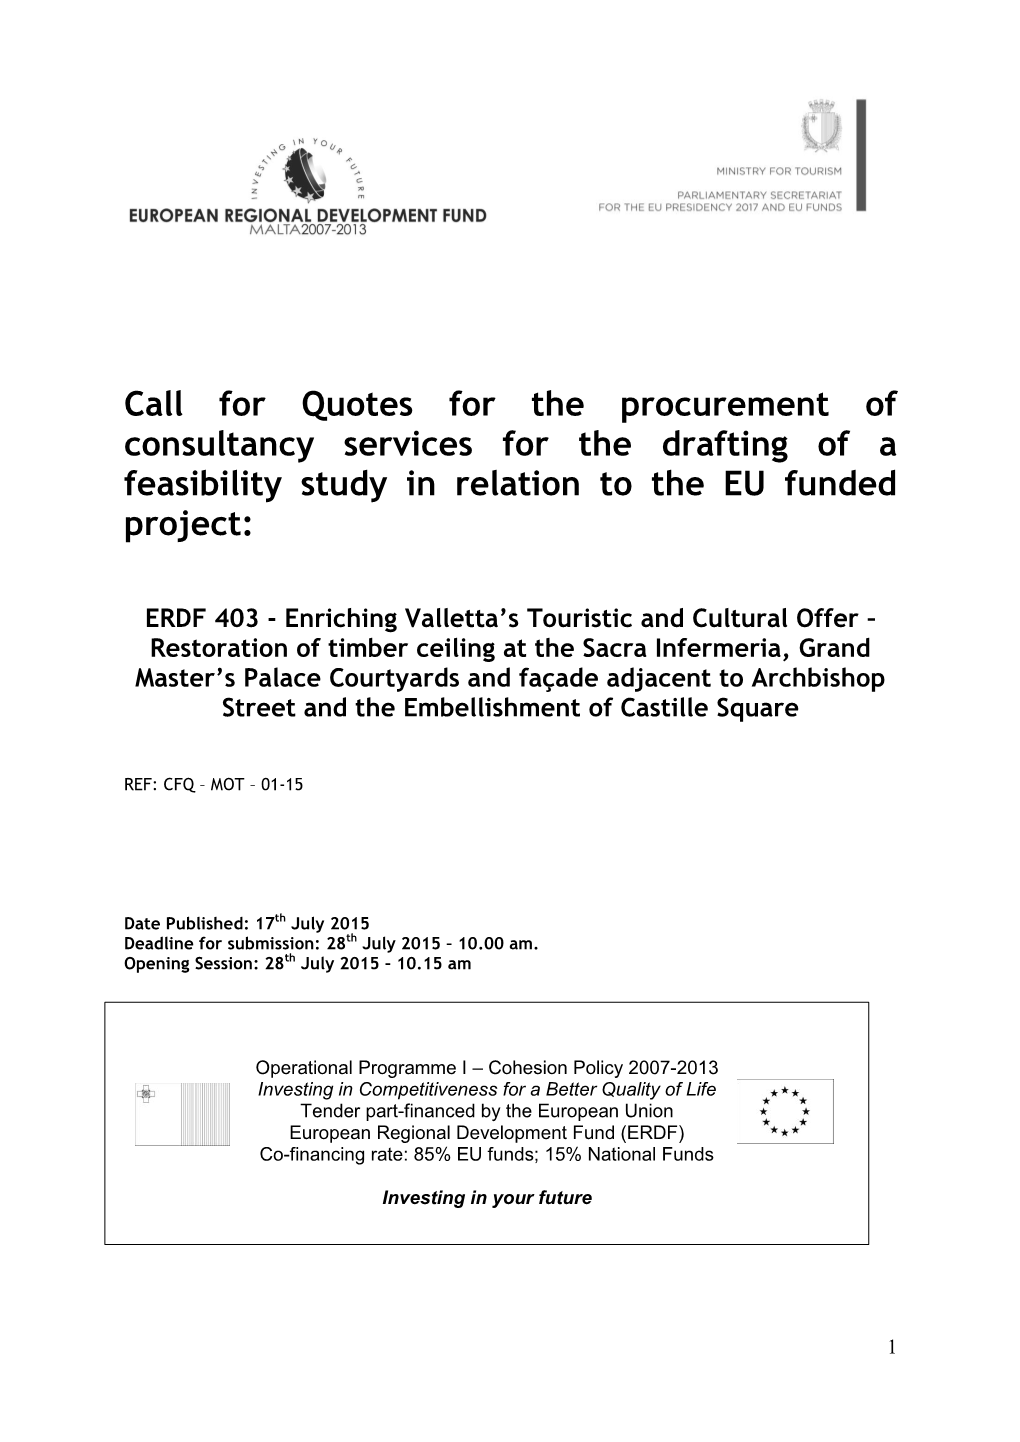 Call for Quotes for the Procurement of Consultancy Services for the Drafting of a Feasibility Study in Relation to the EU Funded Project